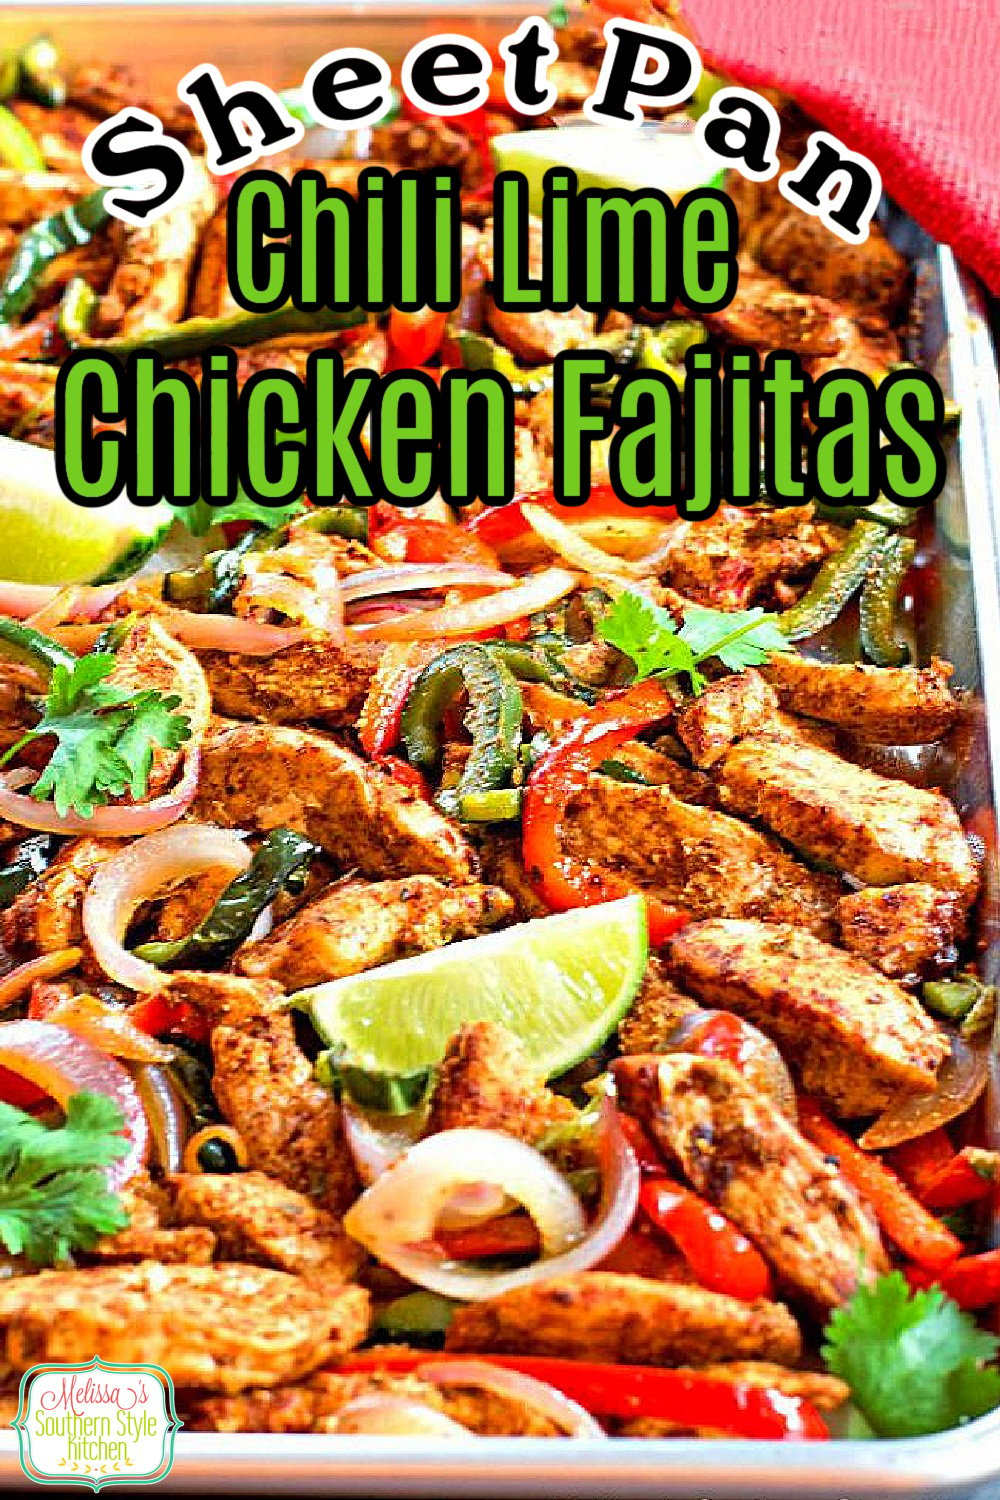 Make these Sheet Pan Chili-Lime Chicken Fajitas and enjoy a homemade fiesta straight from the oven #chickenfajitas #chickenrecipes #fajitas #mexicanfood #mexican #sheetpanchickenfajitas #easychickenbreastrecipes #southernrecipes #dinnerideas via @melissasssk